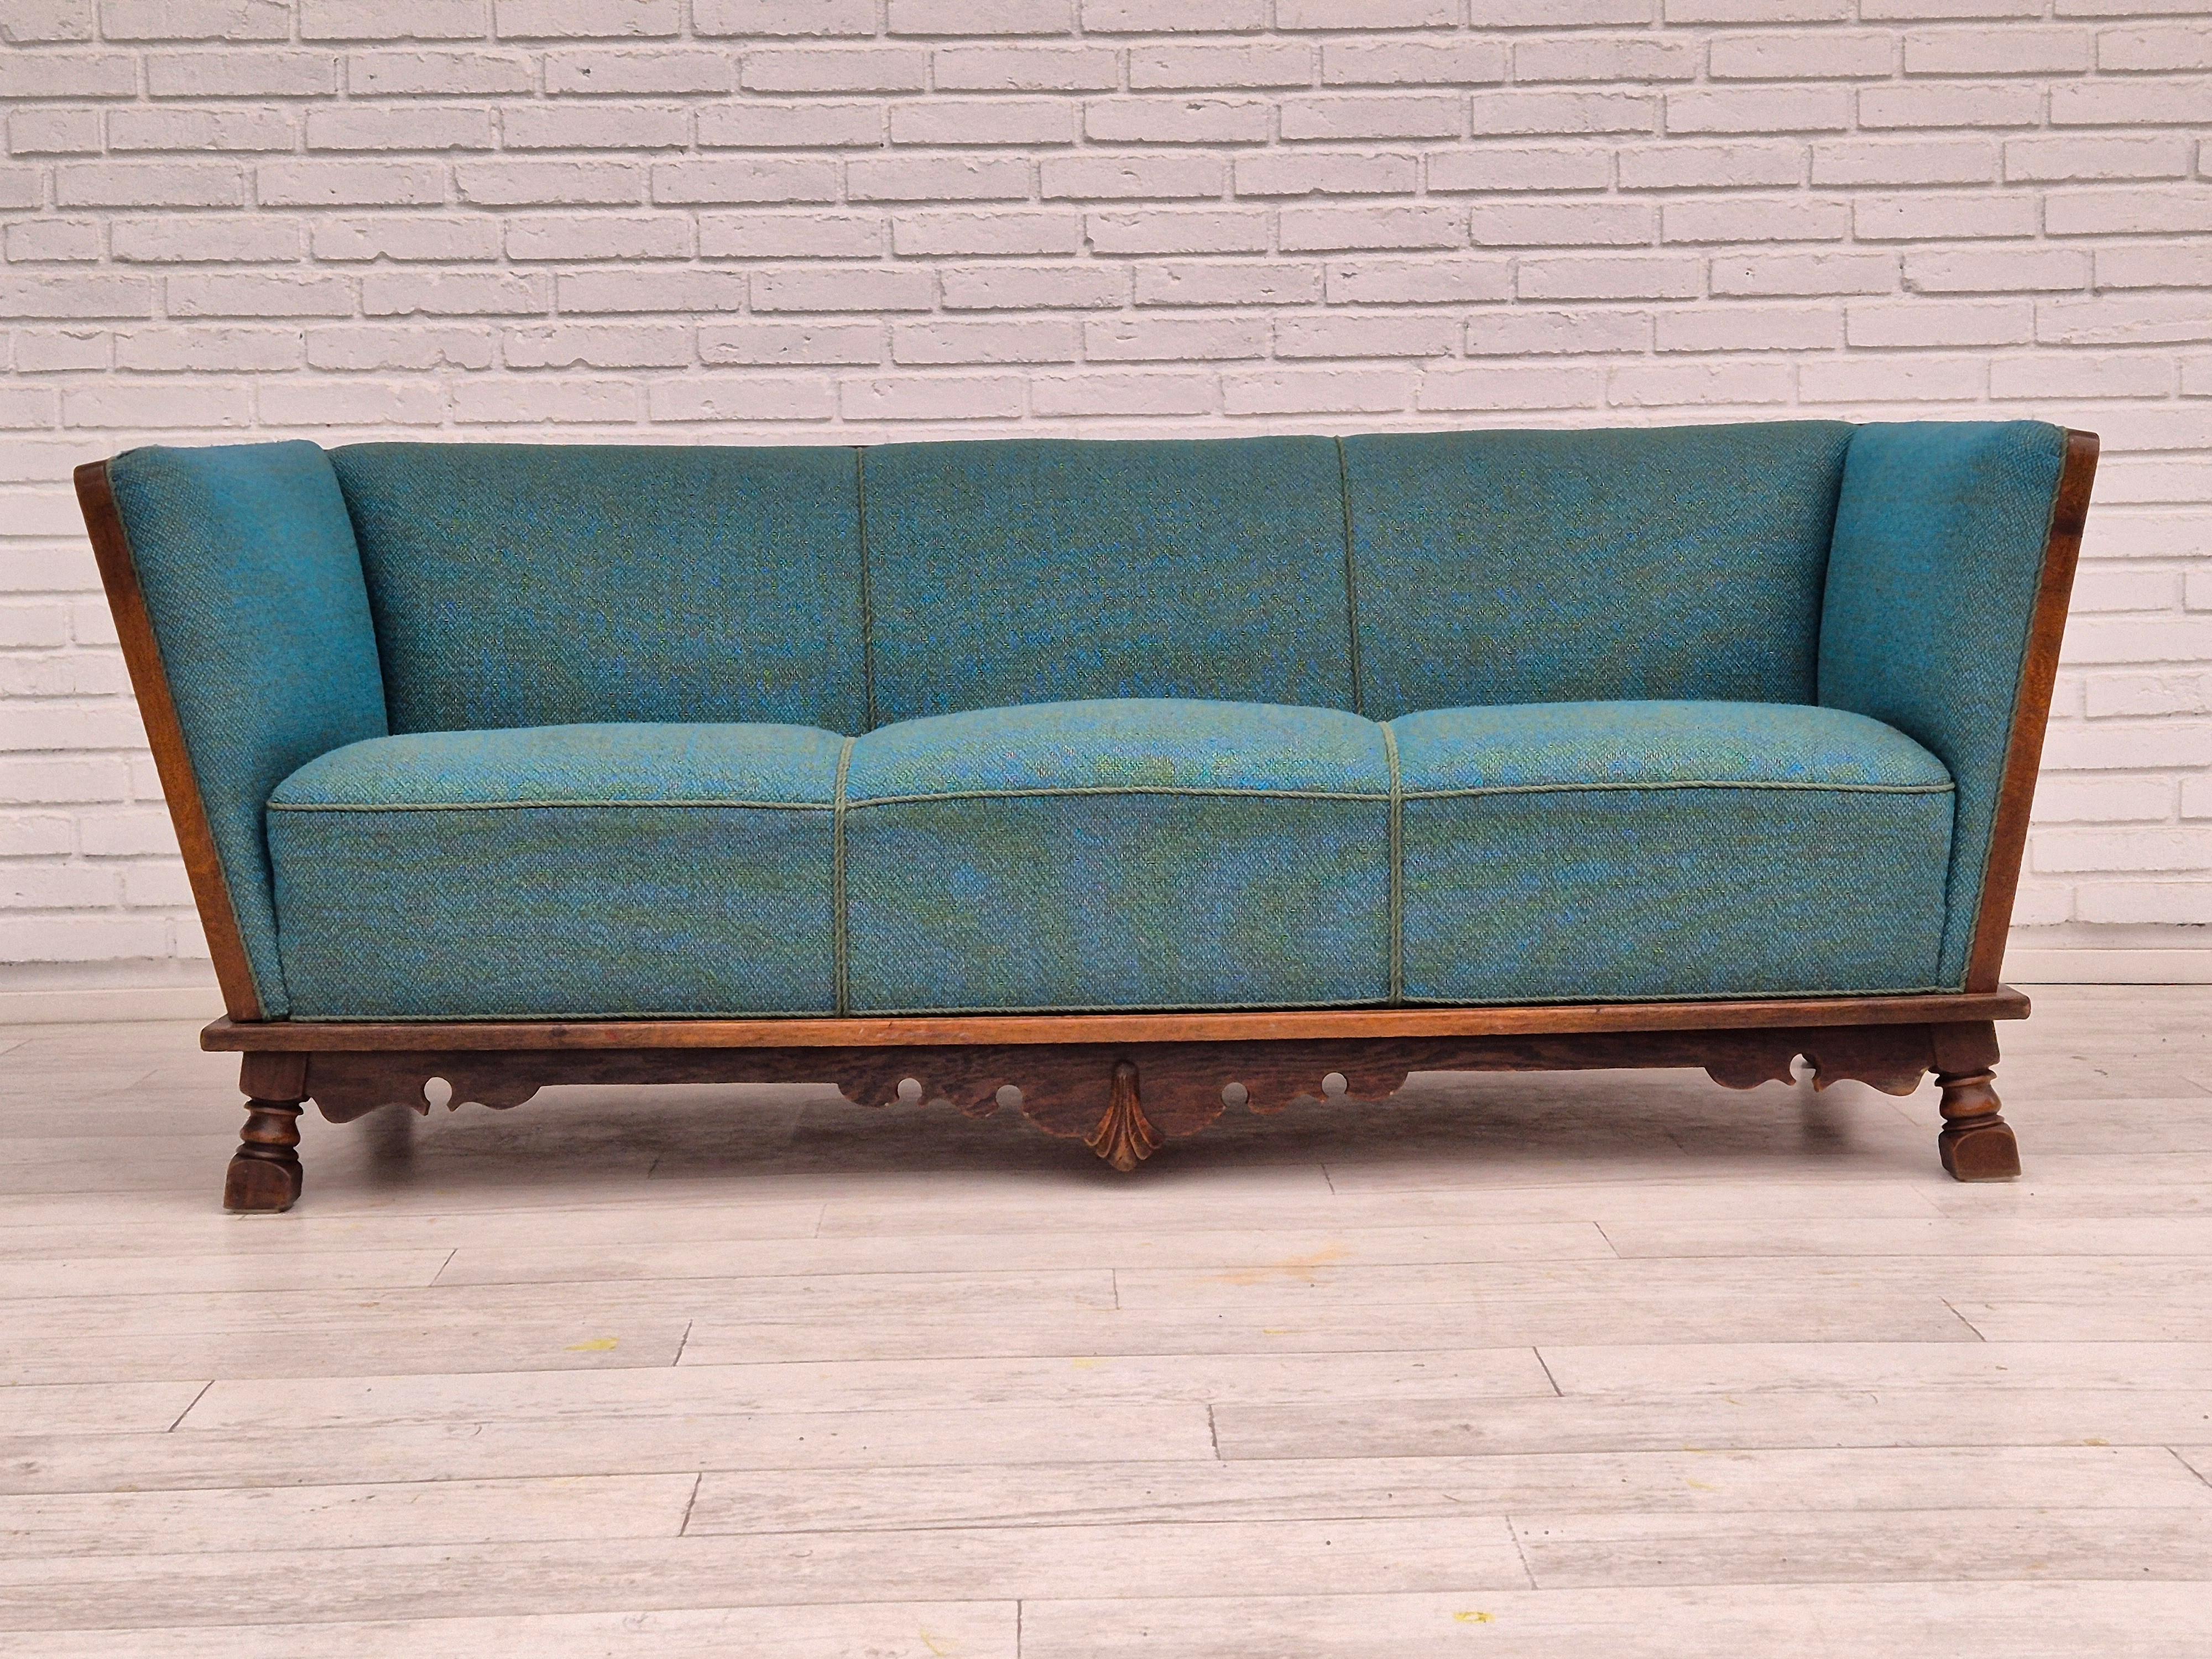 1940-50s, Danish 3 seater drop arm sofa in very good condition: no smells and no stains. Sofa was reupholstered about 20 years ago by craftsman. Furniture wool fabric and dark oak wood. Drop arm on the one side. Springs in the seat. Manufactured by